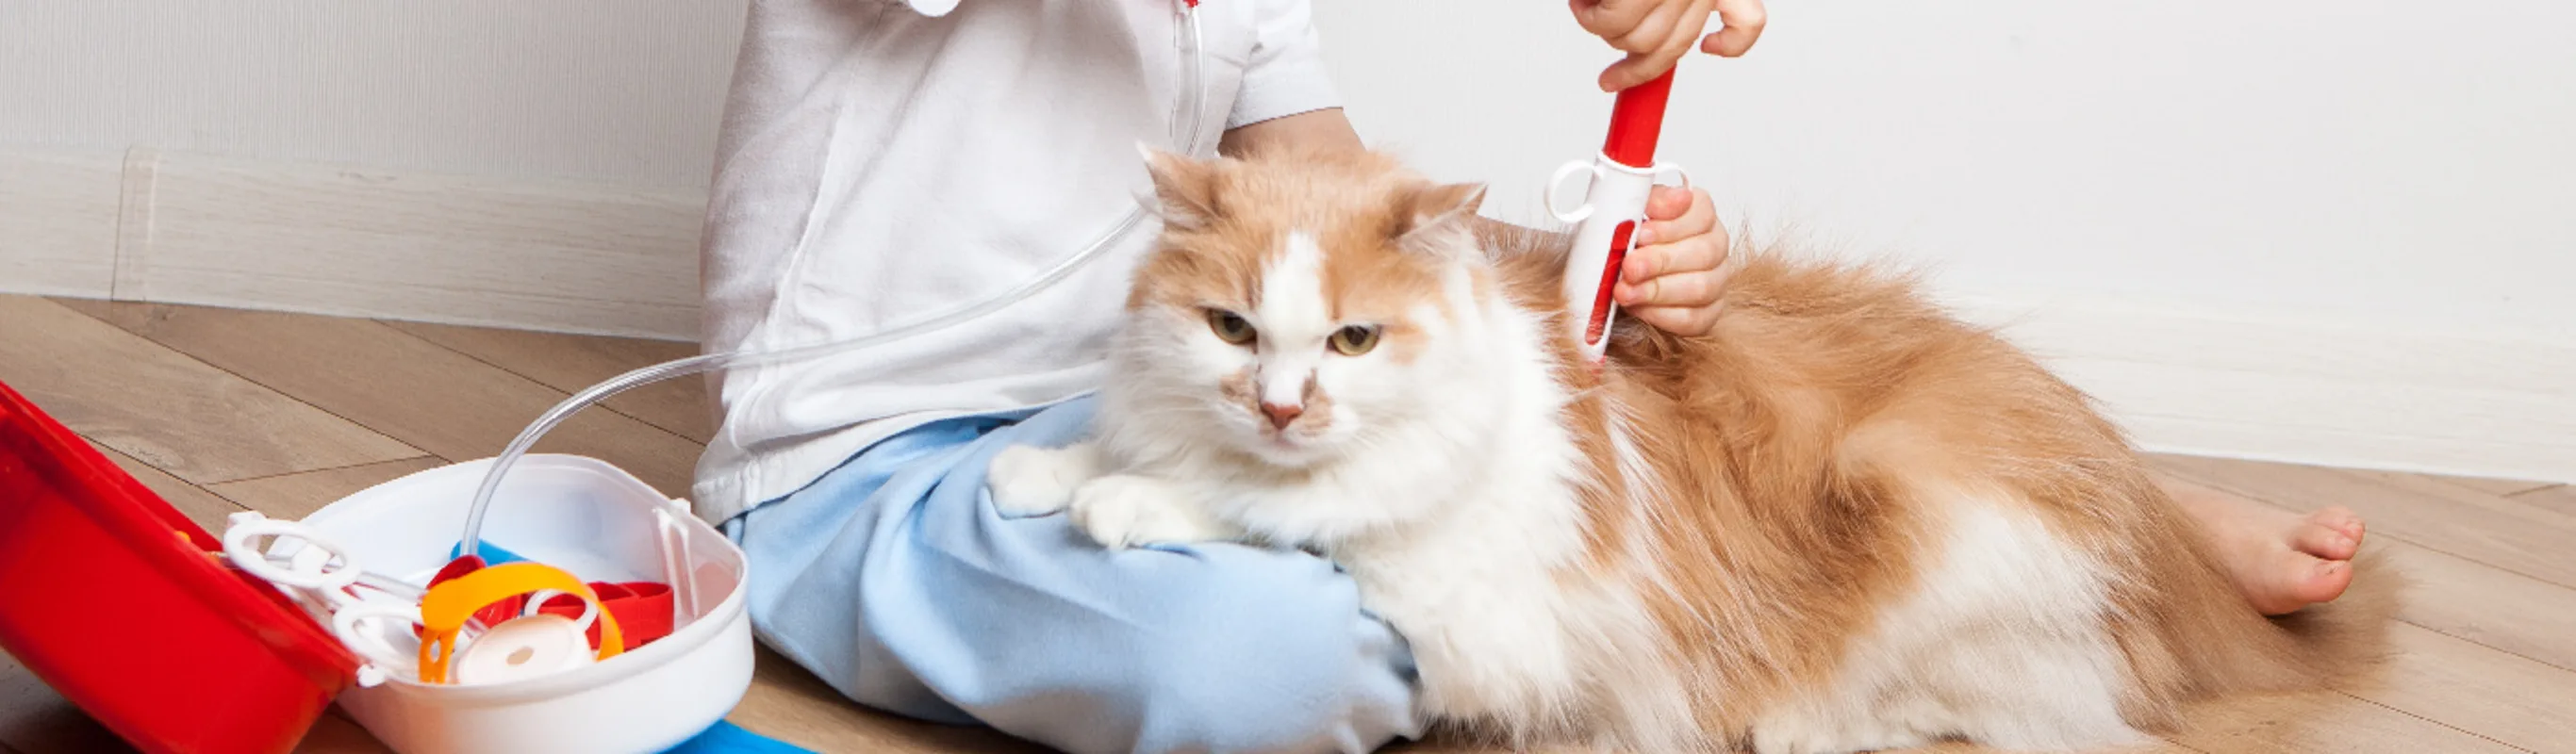 A child pretending to give a cat a check-up with a fake syringe